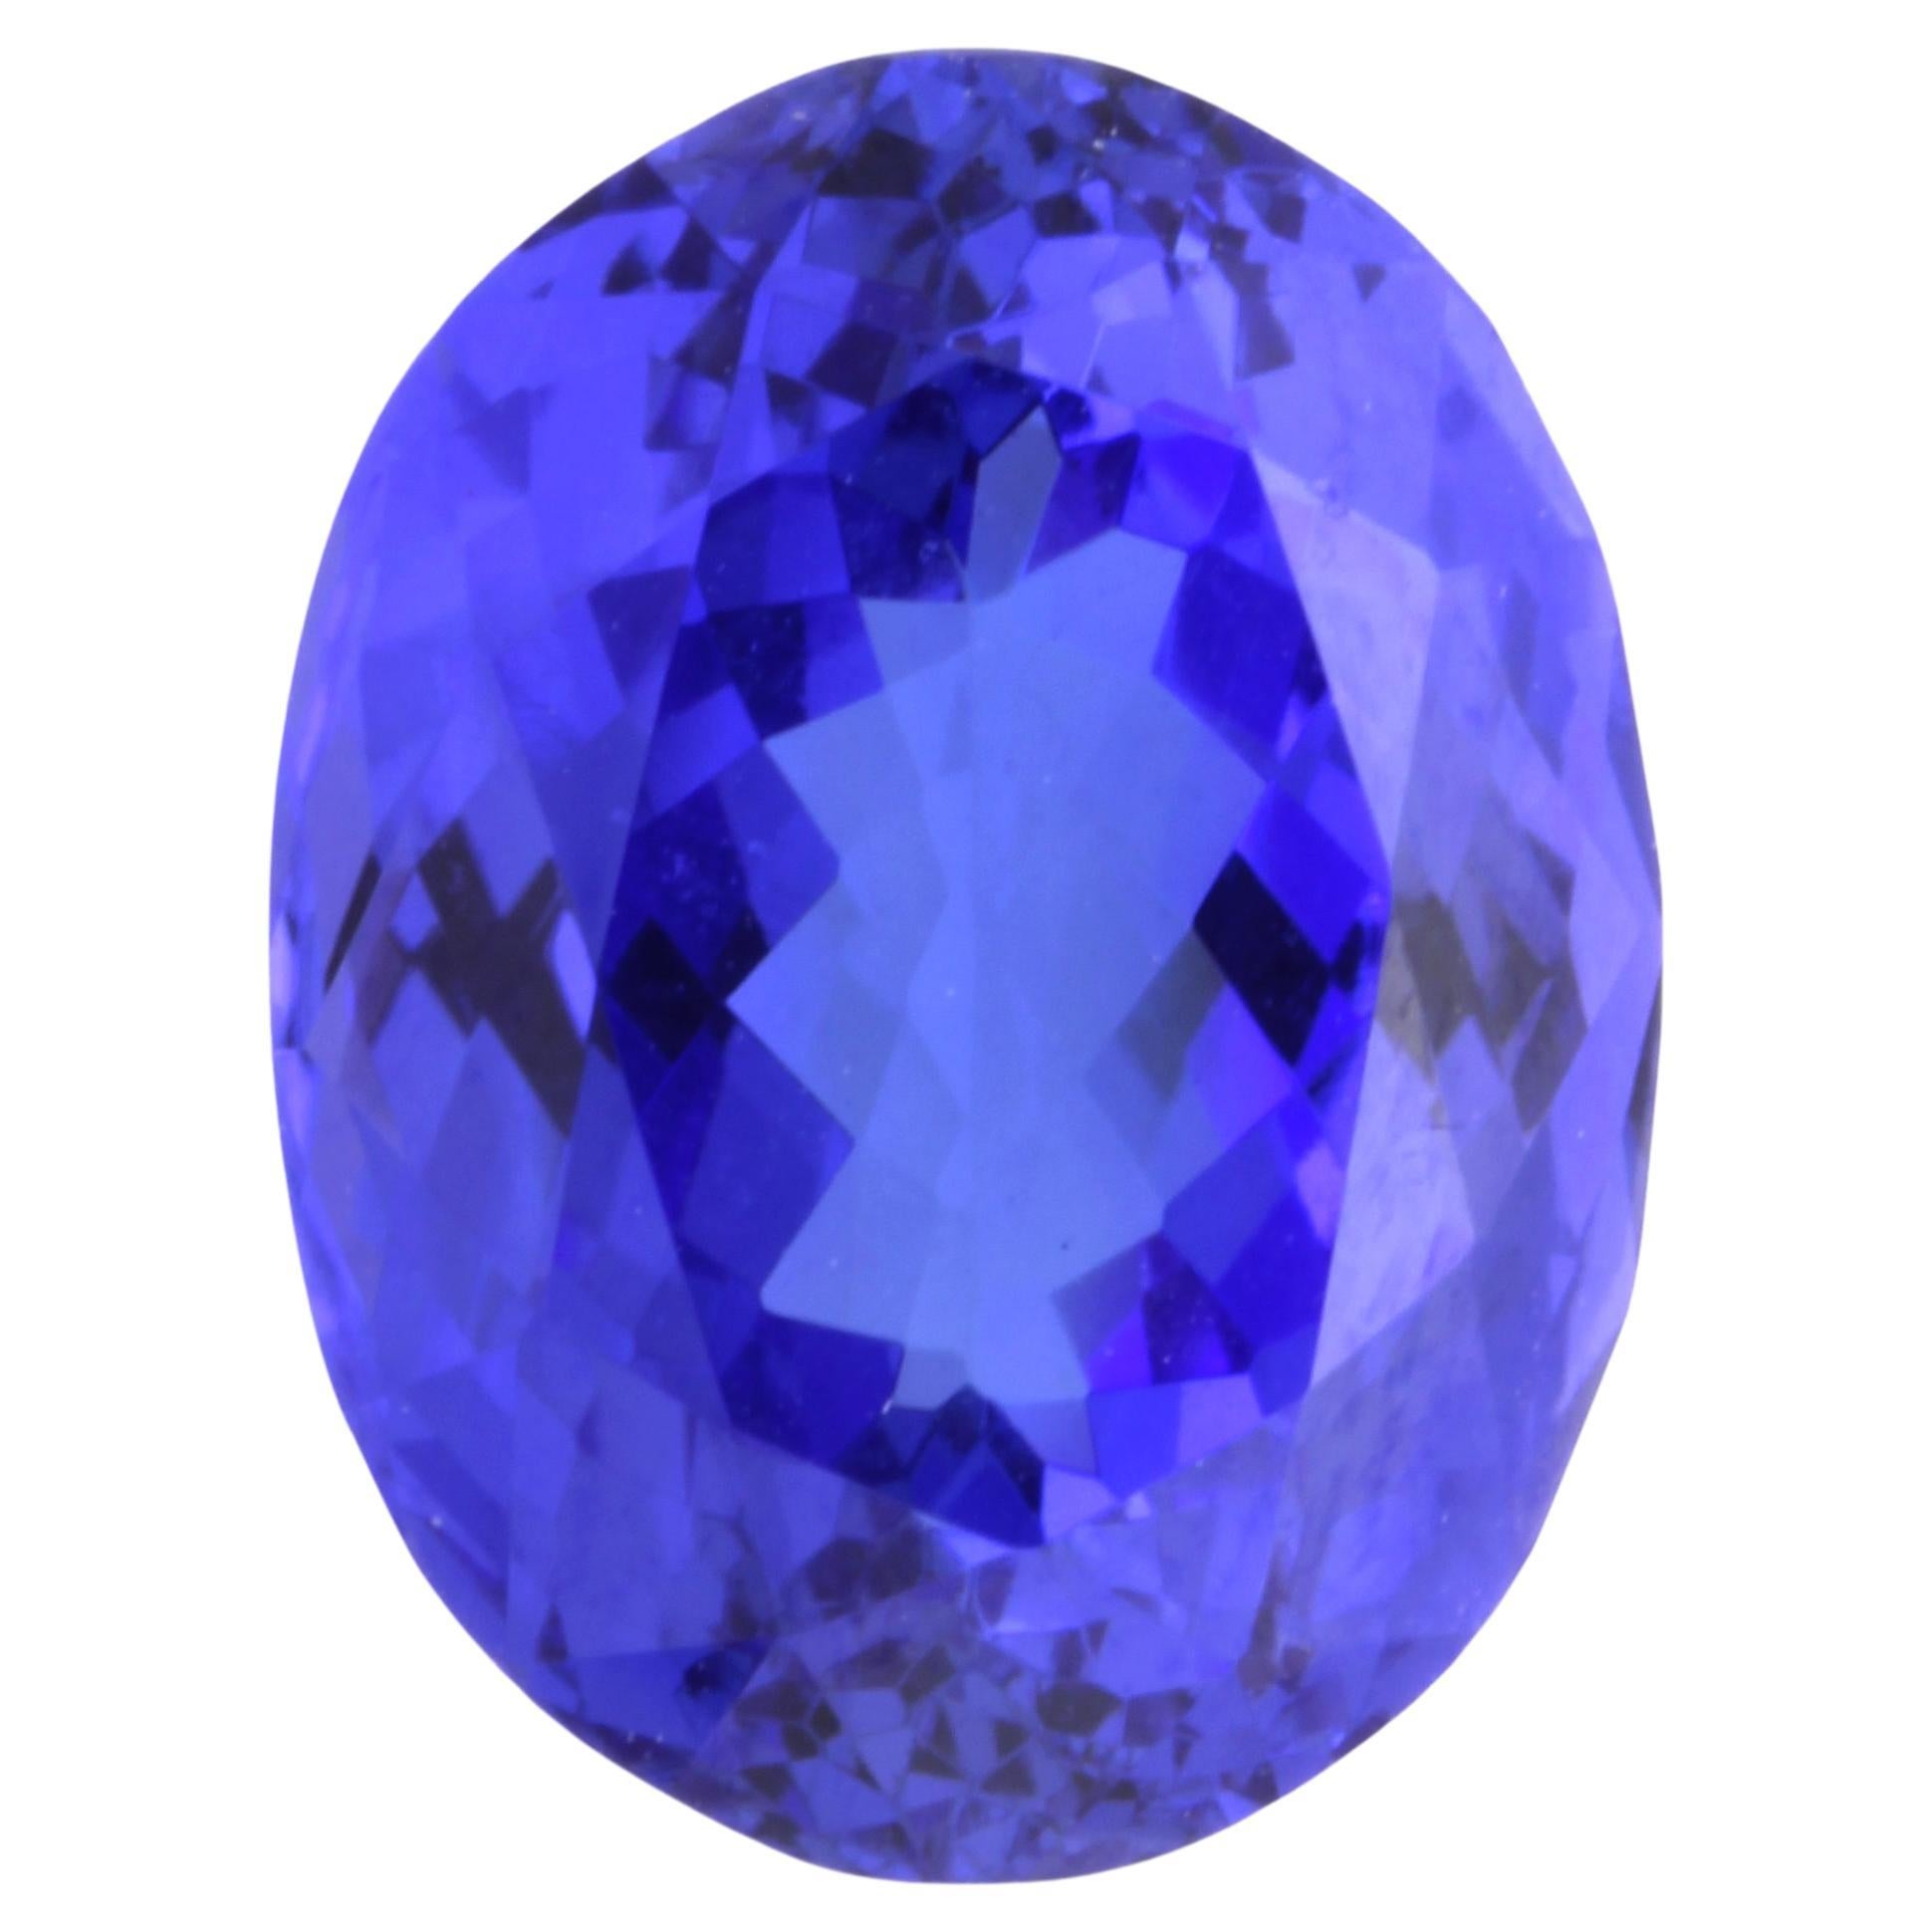 8.86 GAL Certified Oval Tanzanite For Sale